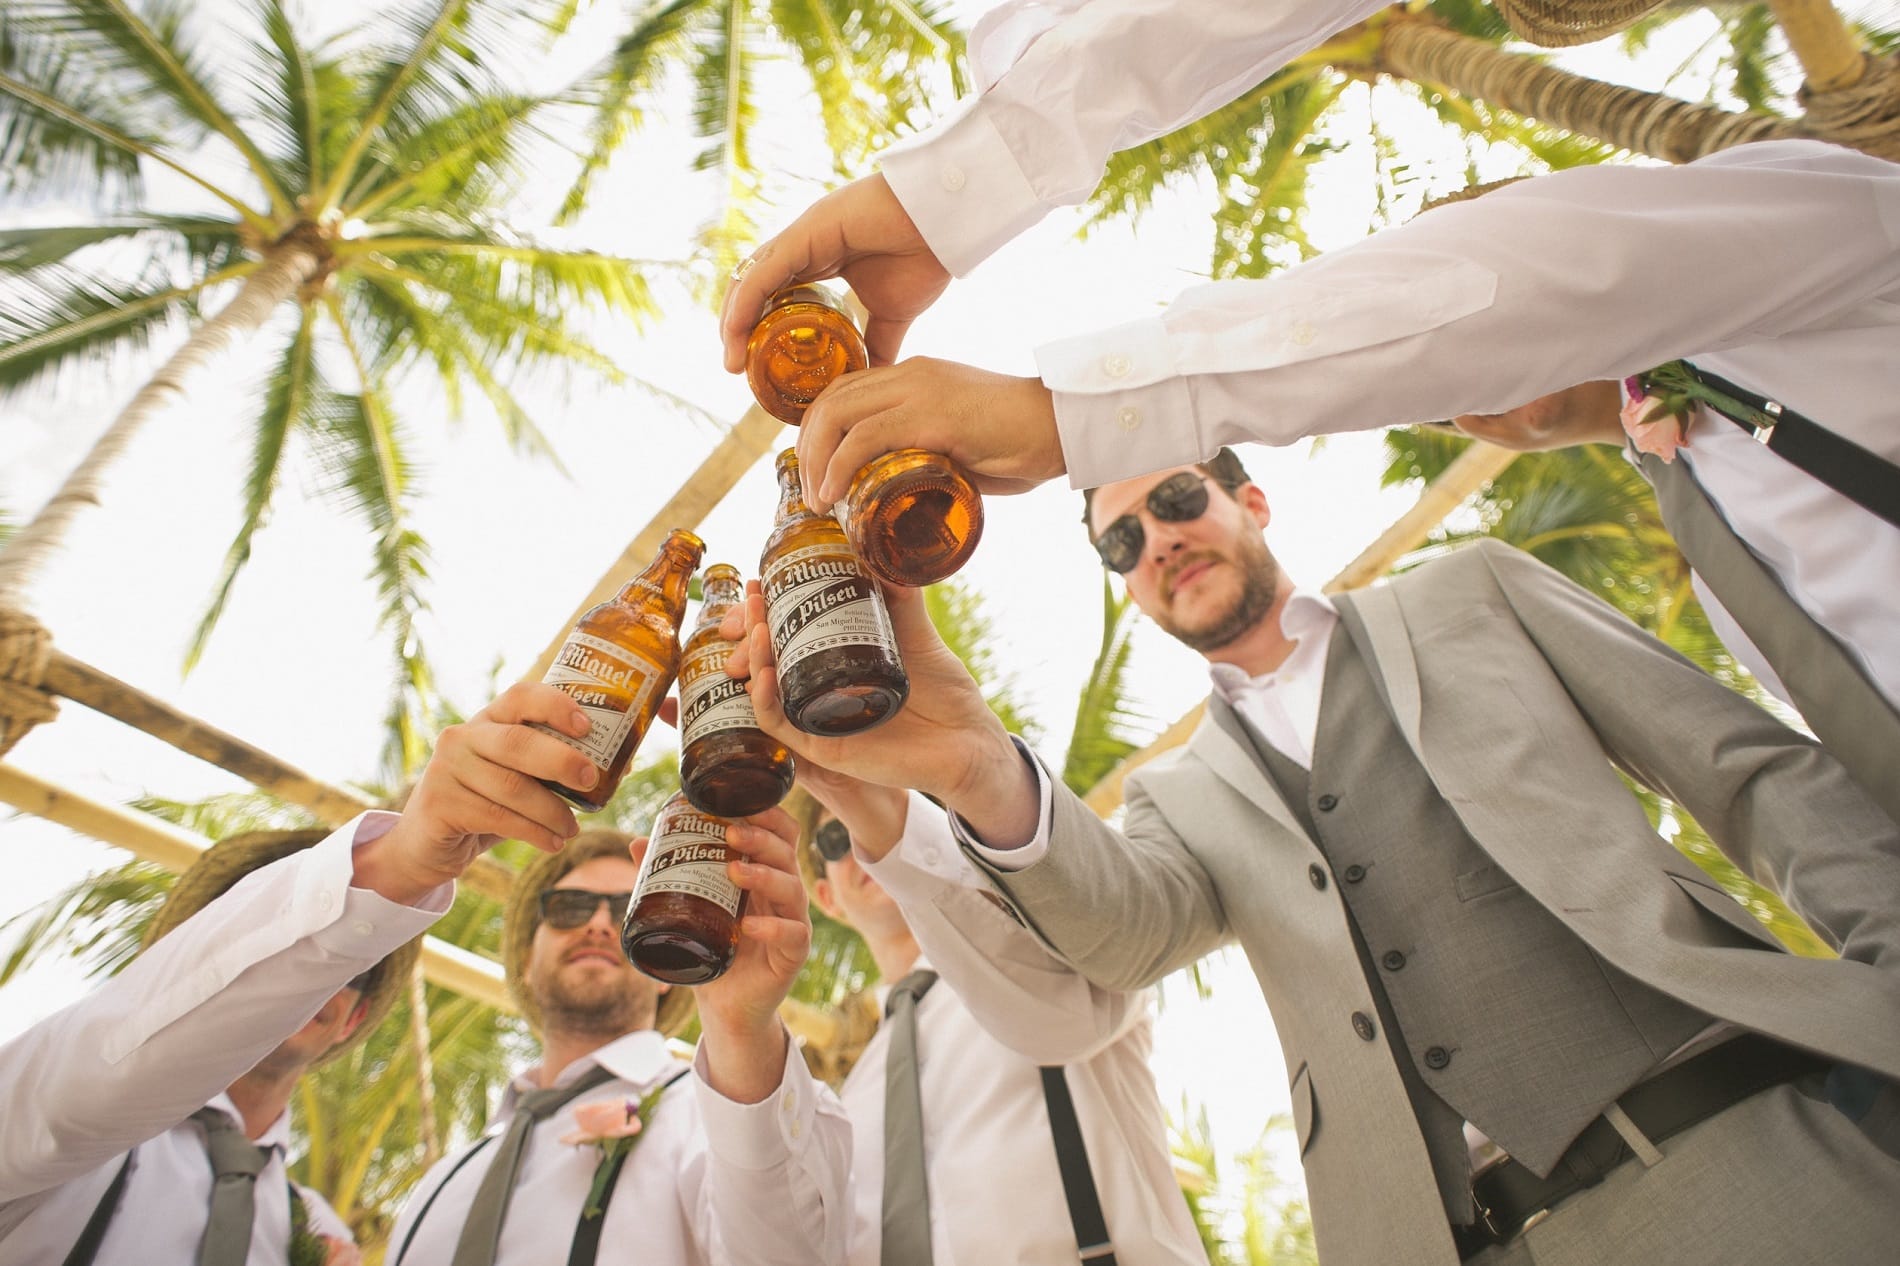 Group of men making a toast